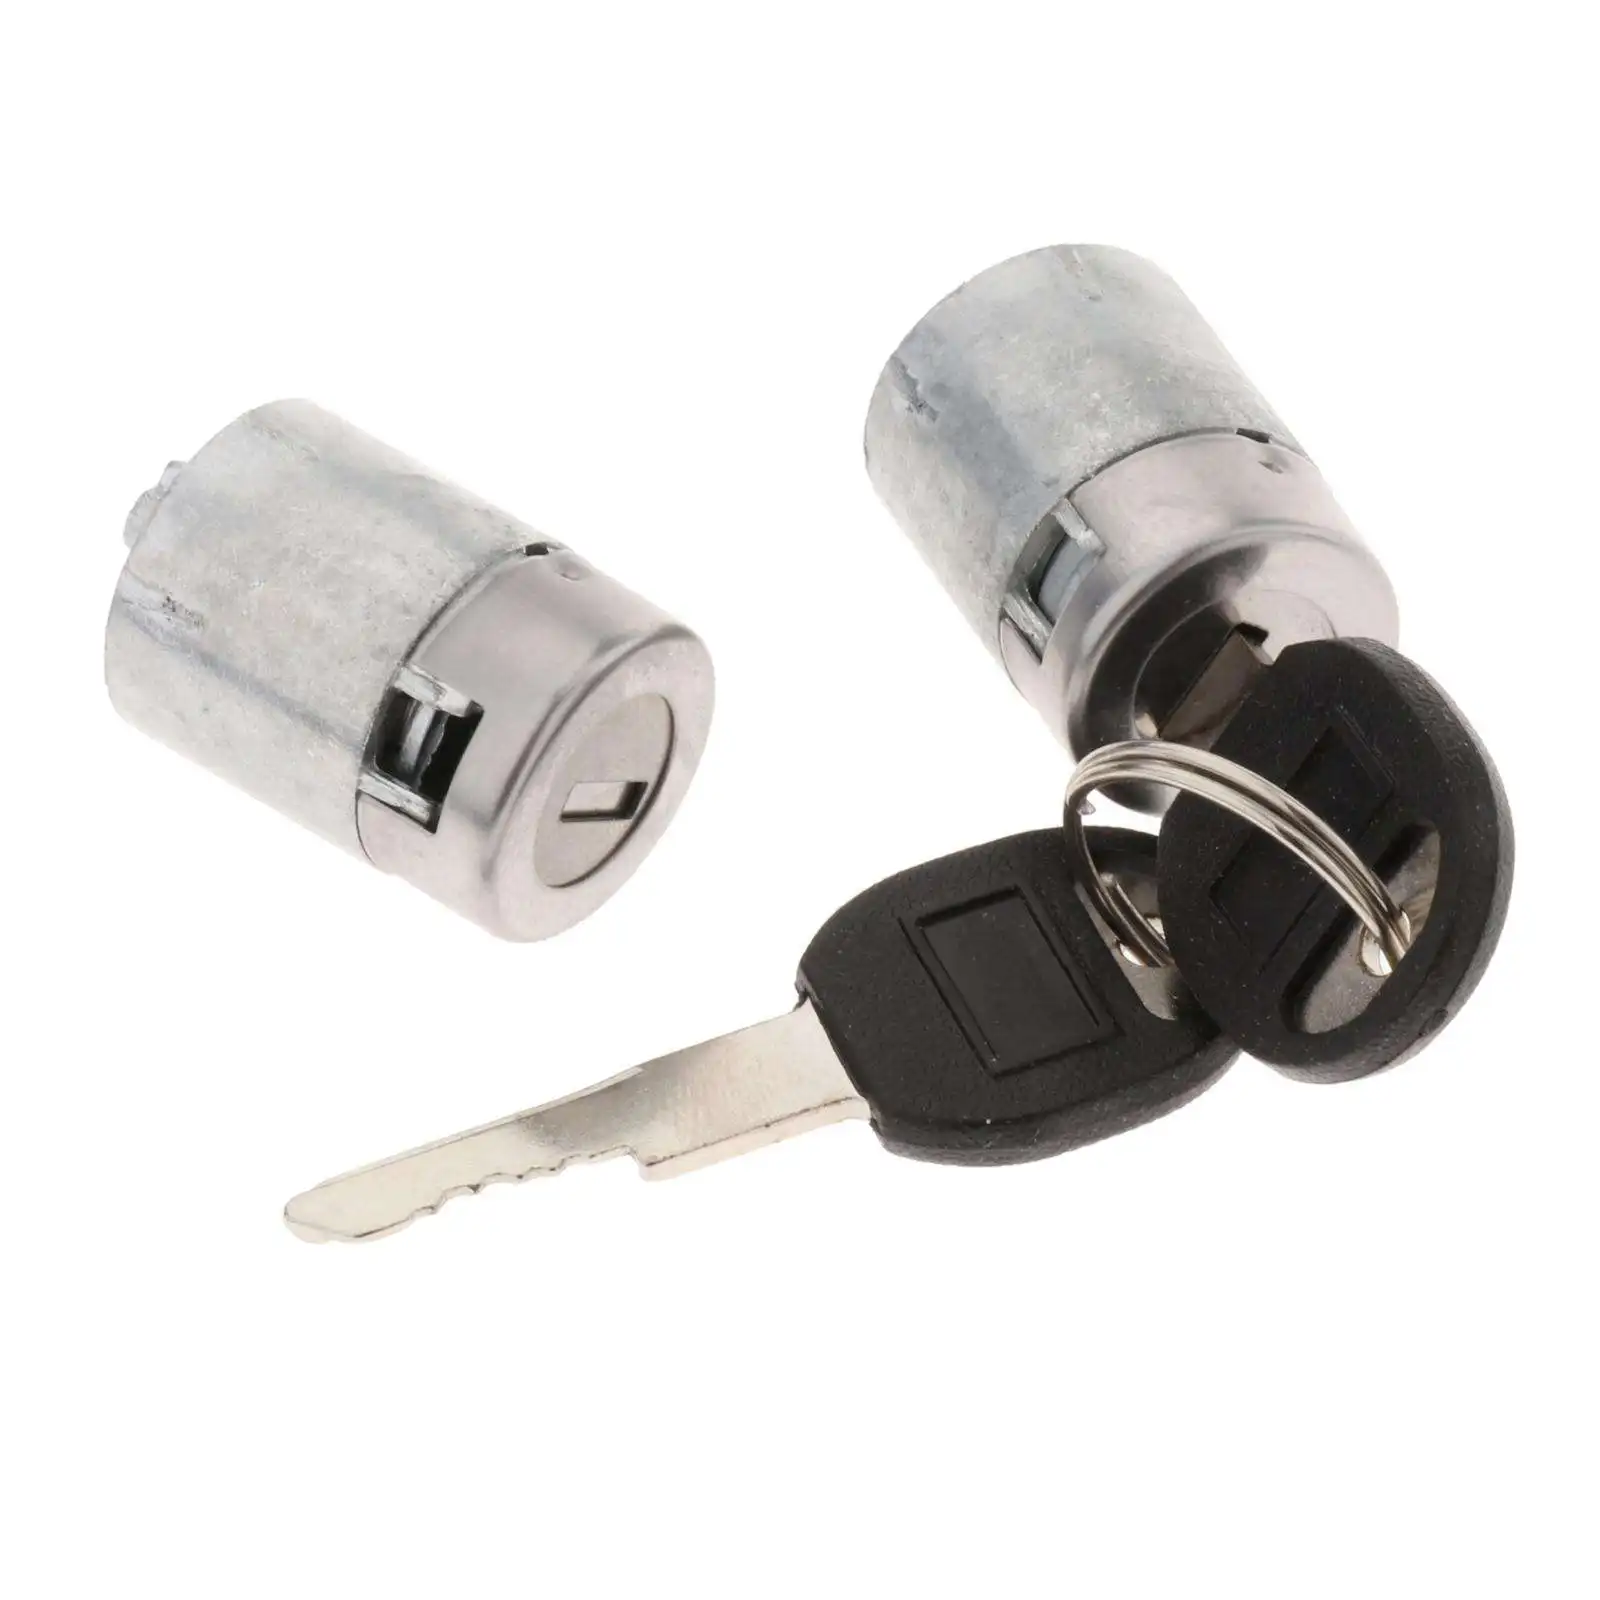 2 Pieces Door Lock Cylinder Set Acceory with Keys 057100275 Acceories for Chevy C1500 1995-99 Compact Lightweight